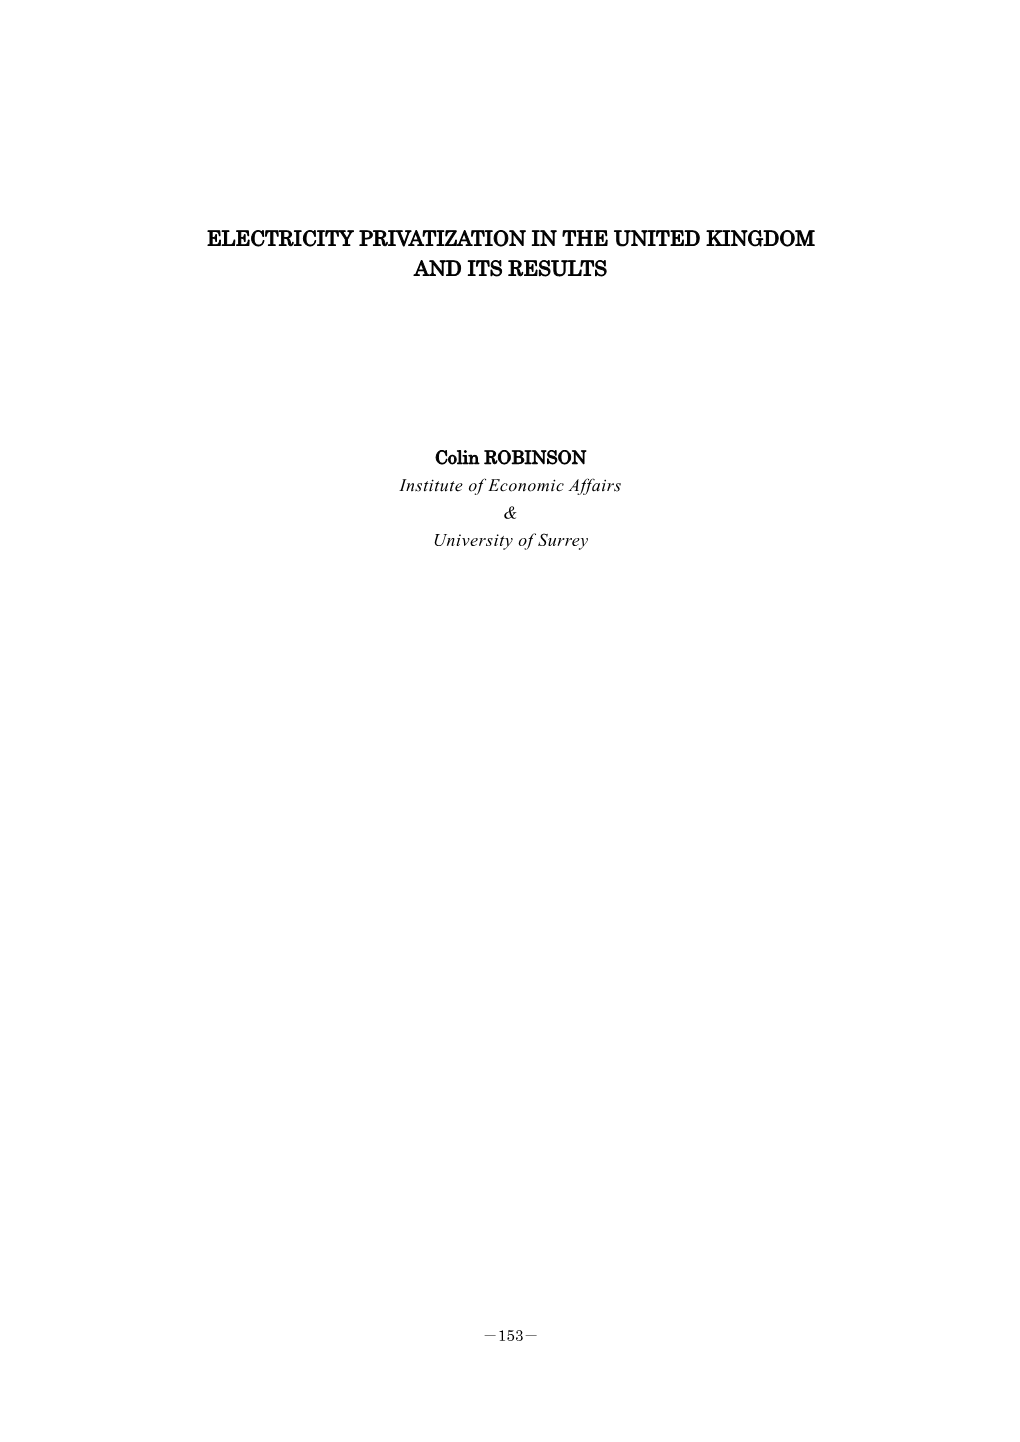 Electricity Privatization in the United Kingdomand Its